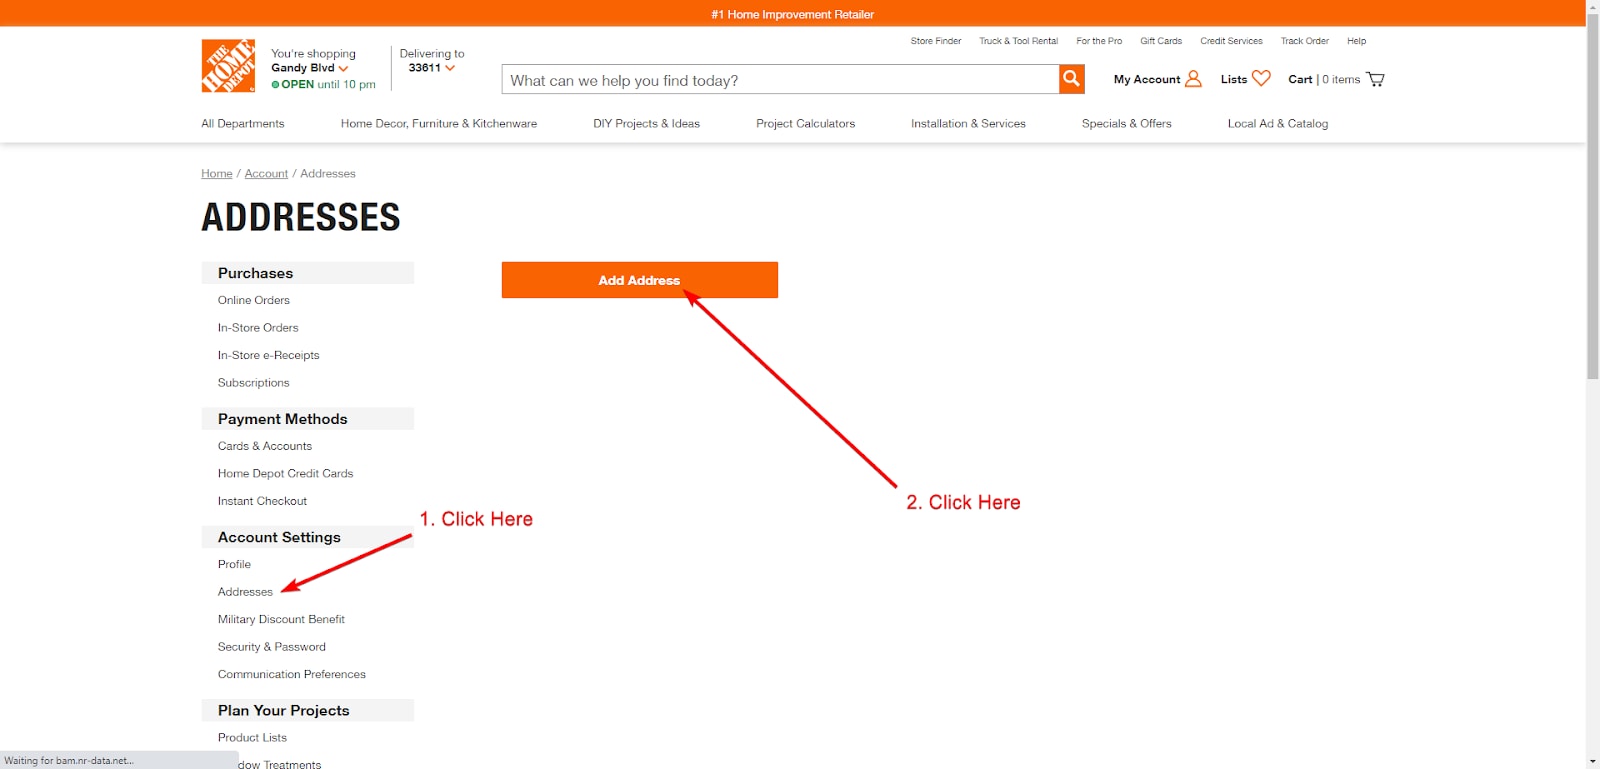 Home Depot Member Account Information